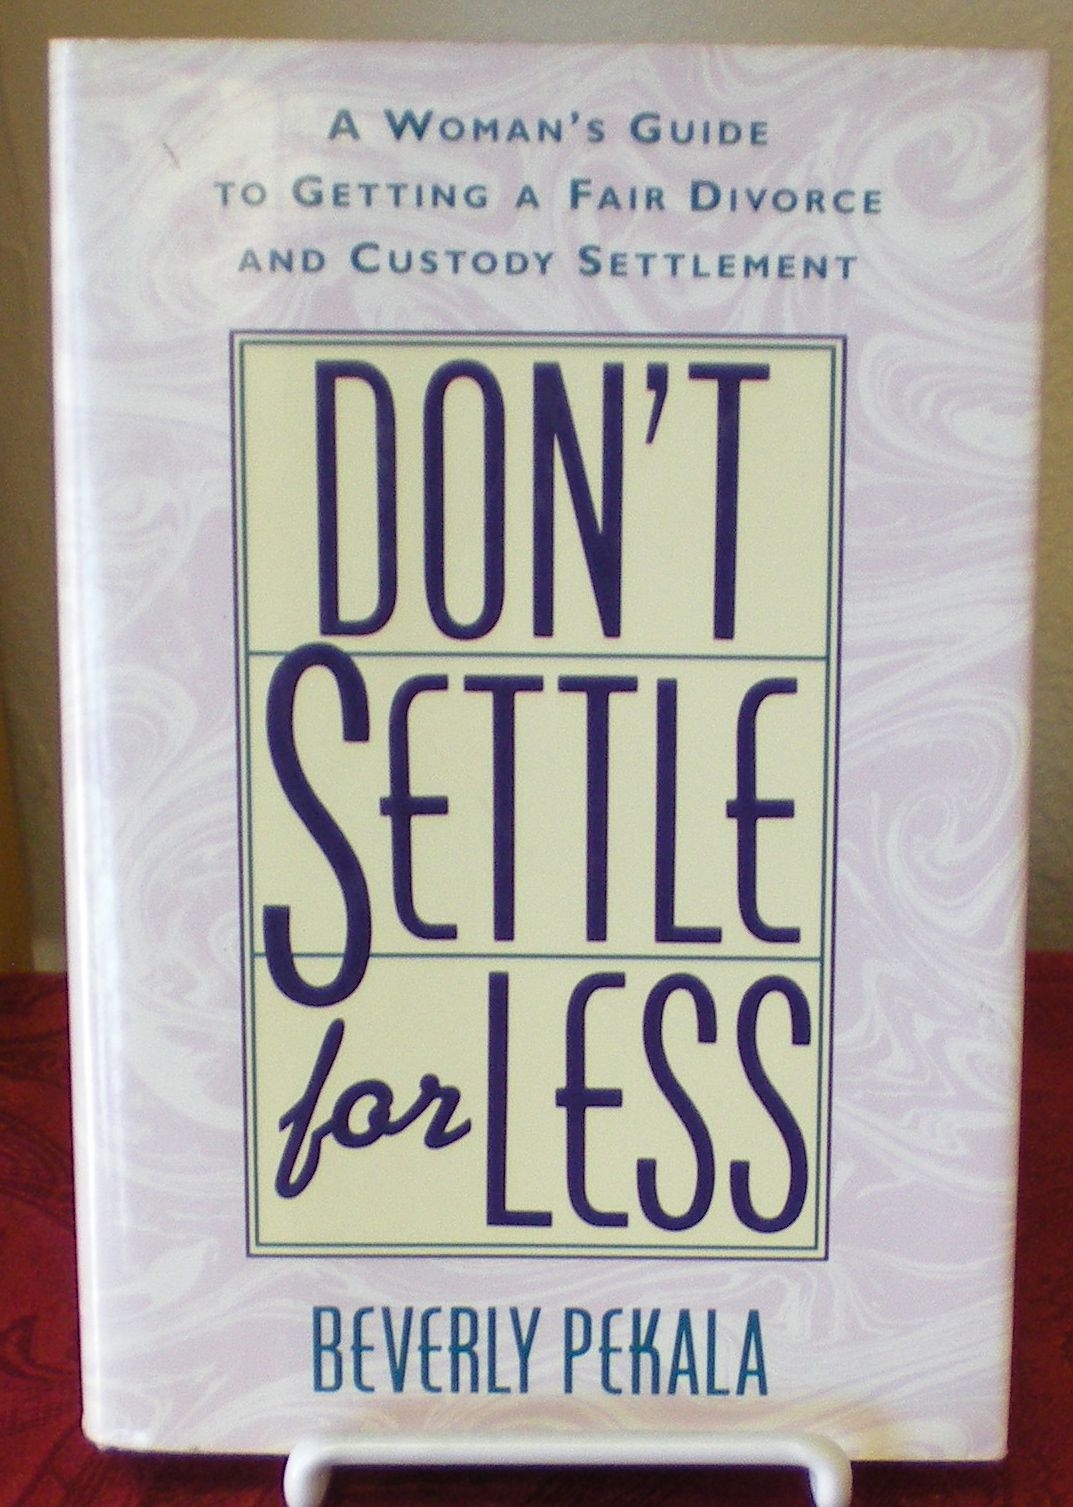 Don't Settle For Less